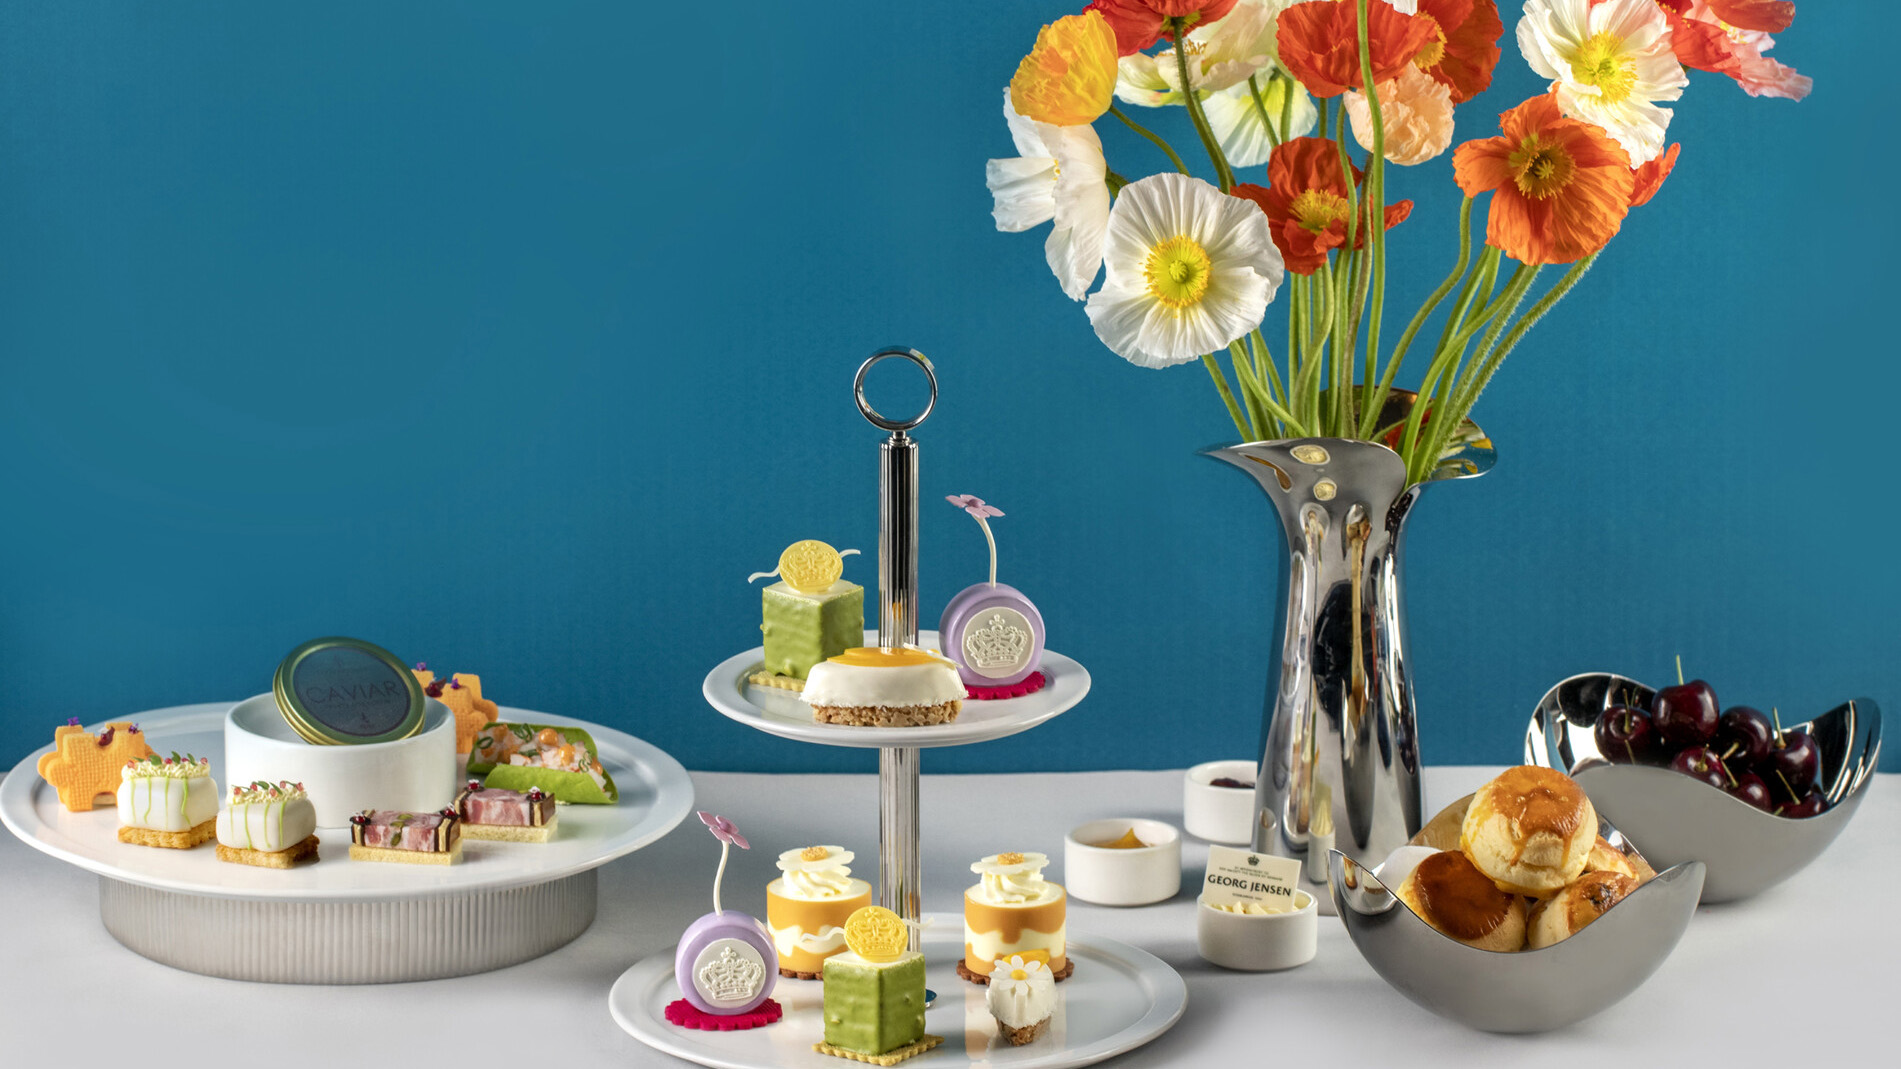 GEORG JENSEN's Spring Blossoms Afternoon Tea at Four Seasons Hotel Beijing 